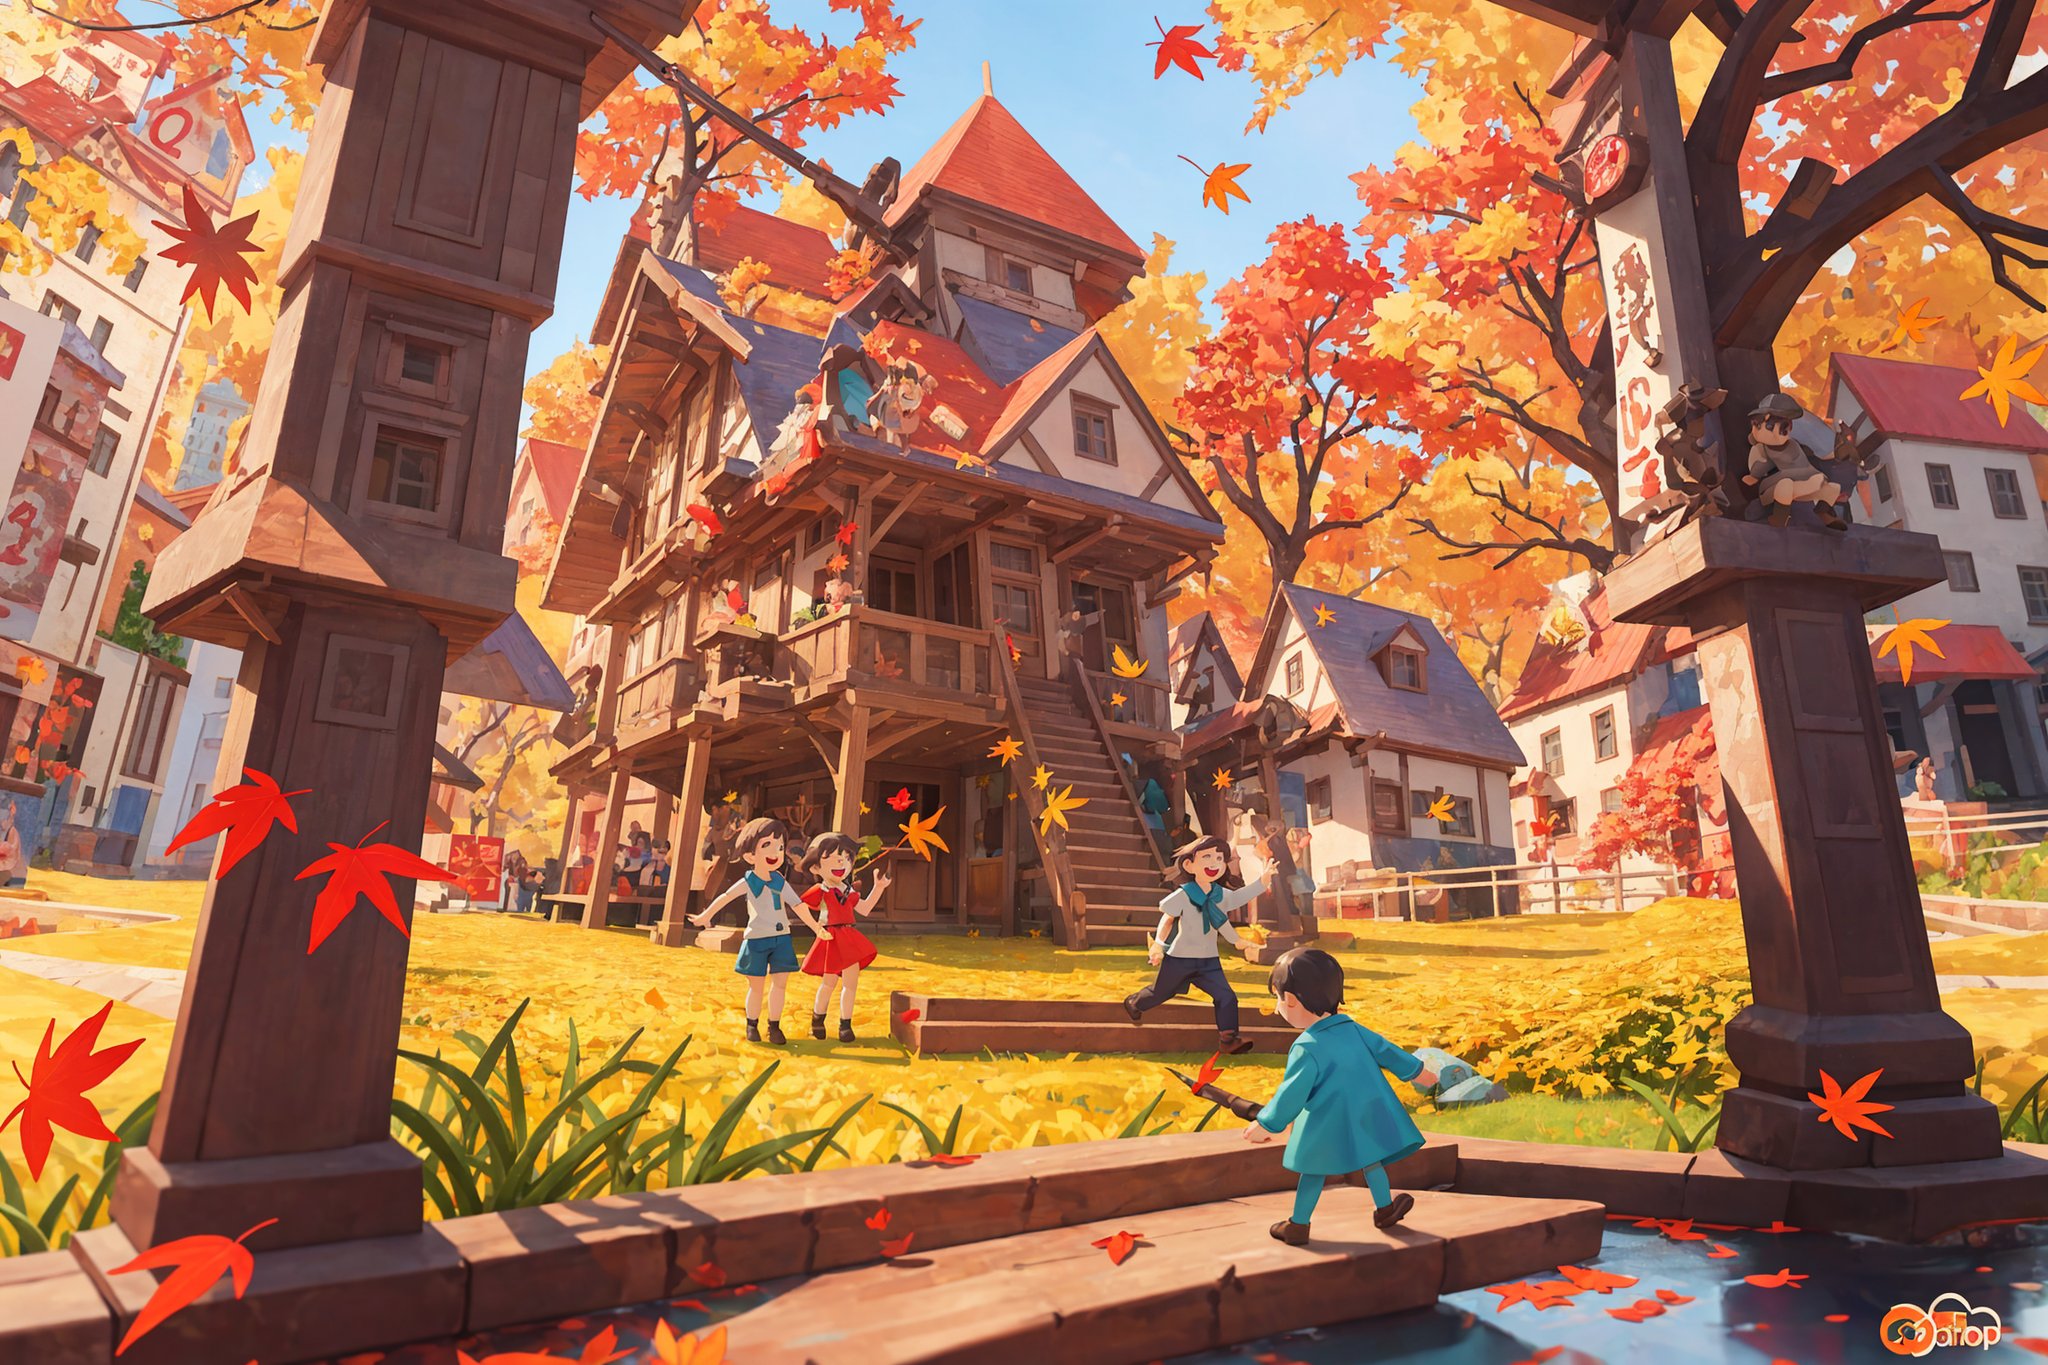 there is something to see, Amazing illustration, beautiful little city, (crowded:0.4) town, 3d render, kids illustration, masterpiece, detailed, perfect clarity, (cars:0.5), happy mood, nature, yellow leaves,Story book, contrast, wallpaper,Story book ,3d style, autumn,More Detail